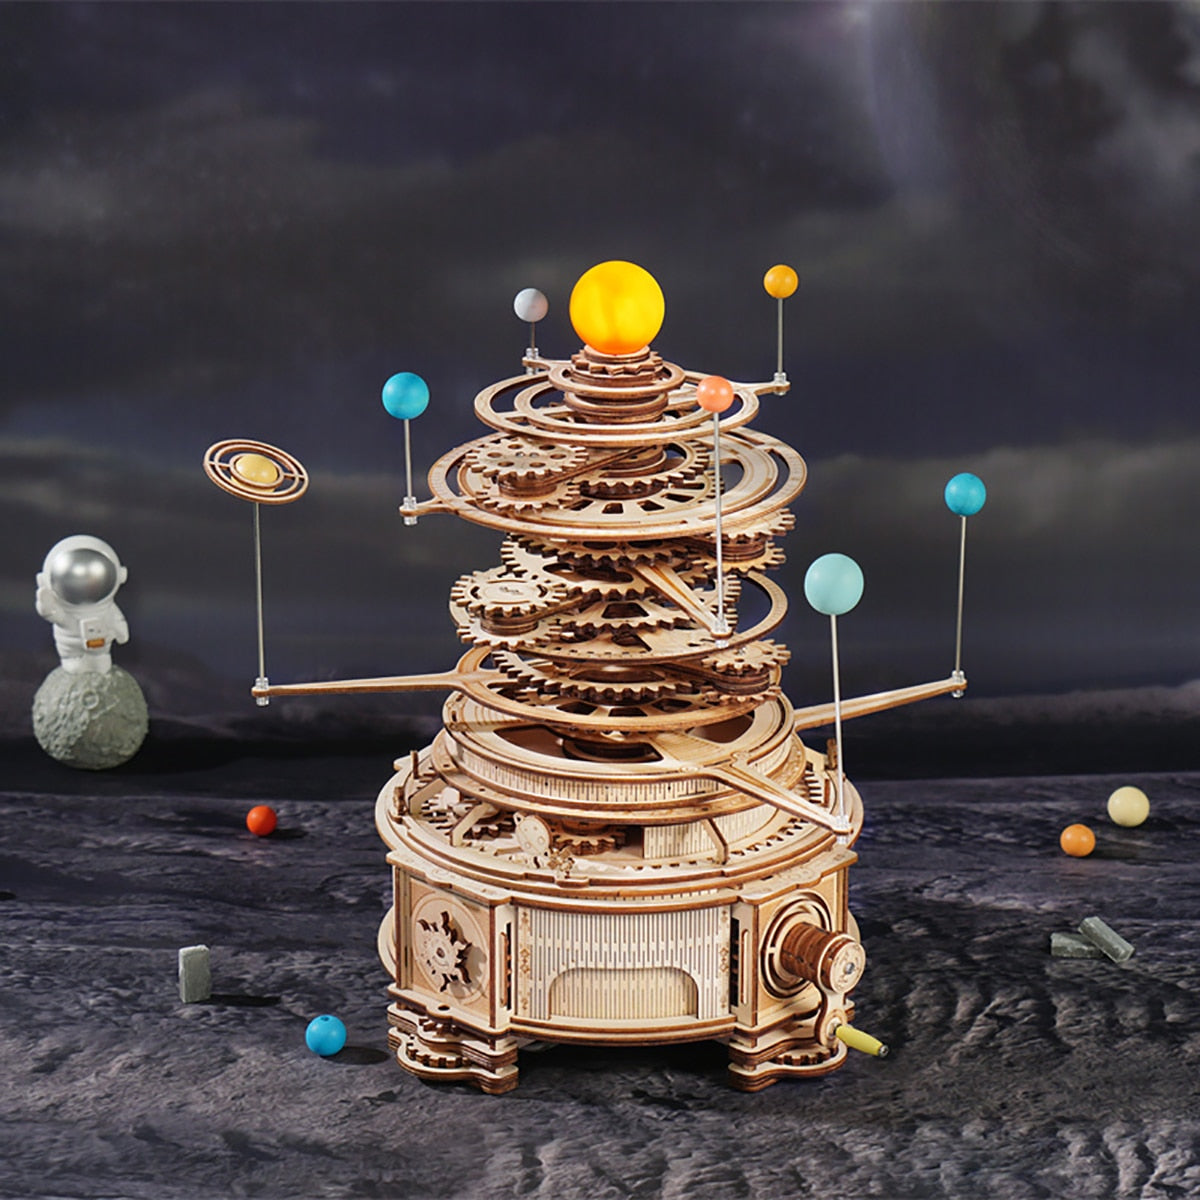 Robotime Rokr Mechanical Orrery 316PCS Rotatable DIY 3D Wooden Puzzles Model Building Block Kits Toy Gift for Teens Adult